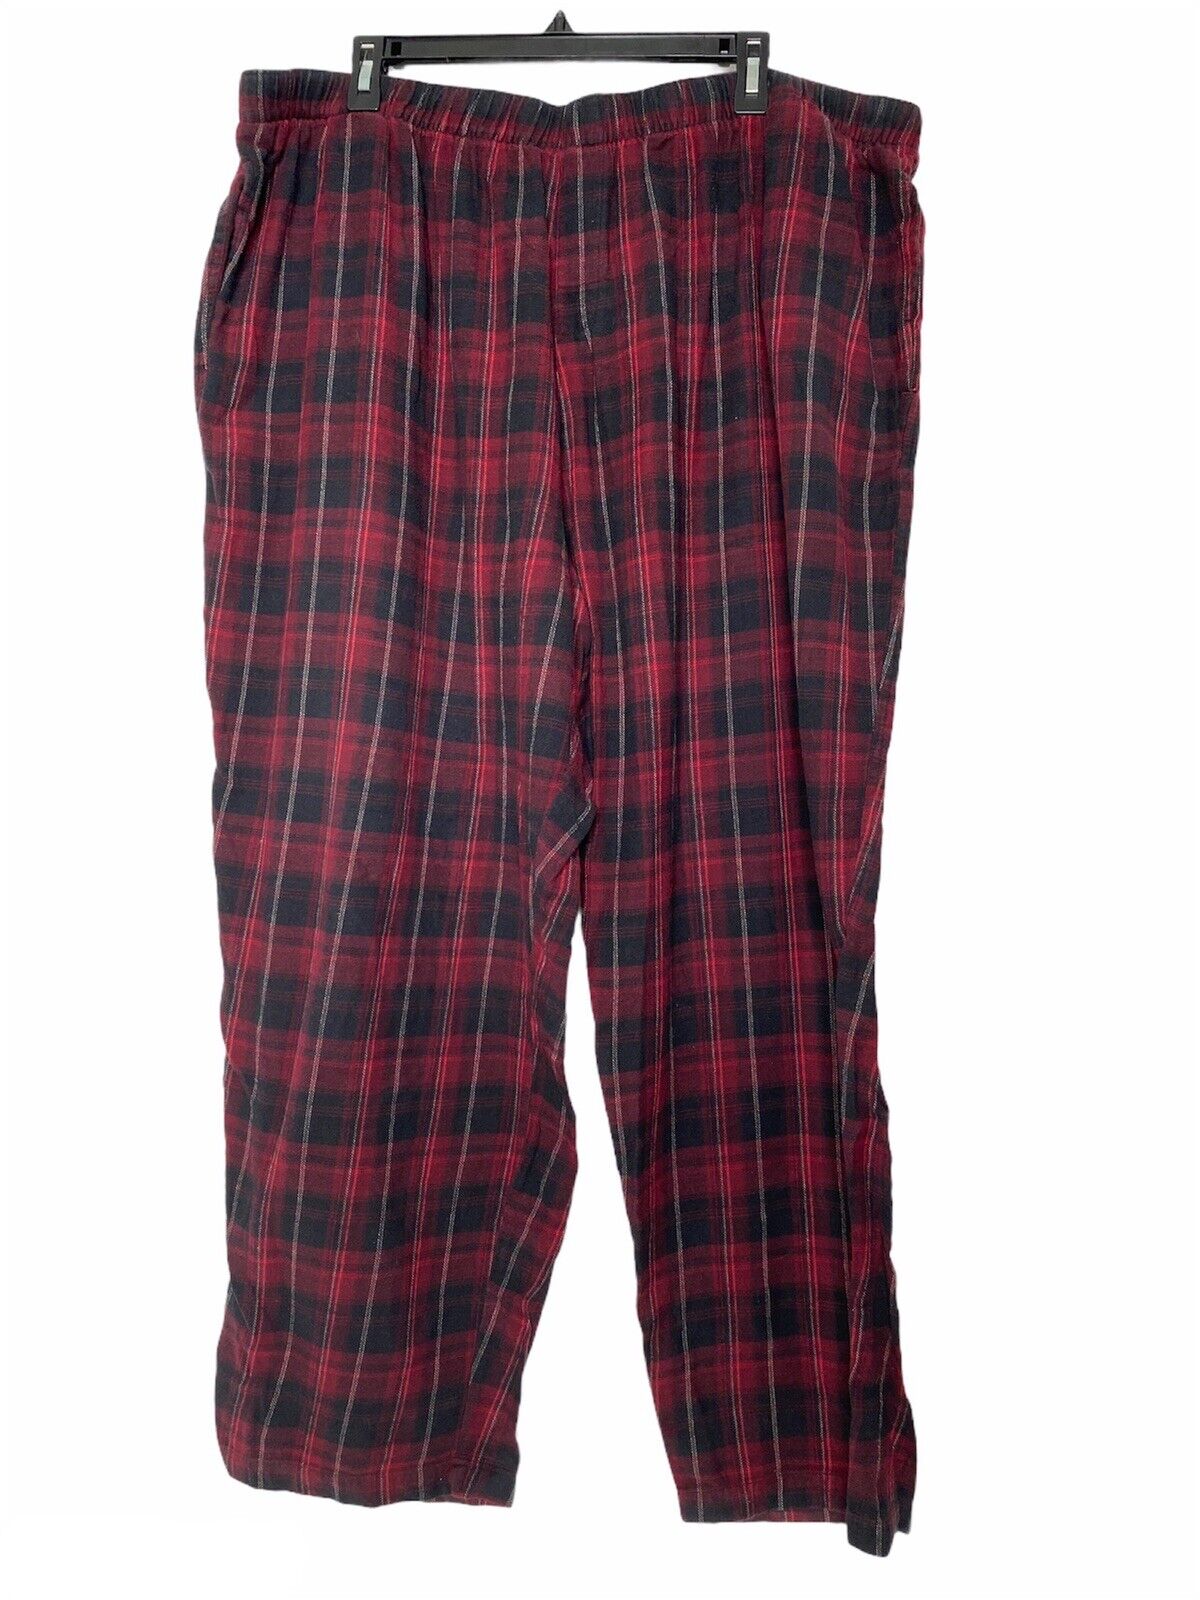 Big Dogs Mens 4X 5 popular Flannel Lounge Pants Plaid P Pajamas Red Tartan A surprise price is realized